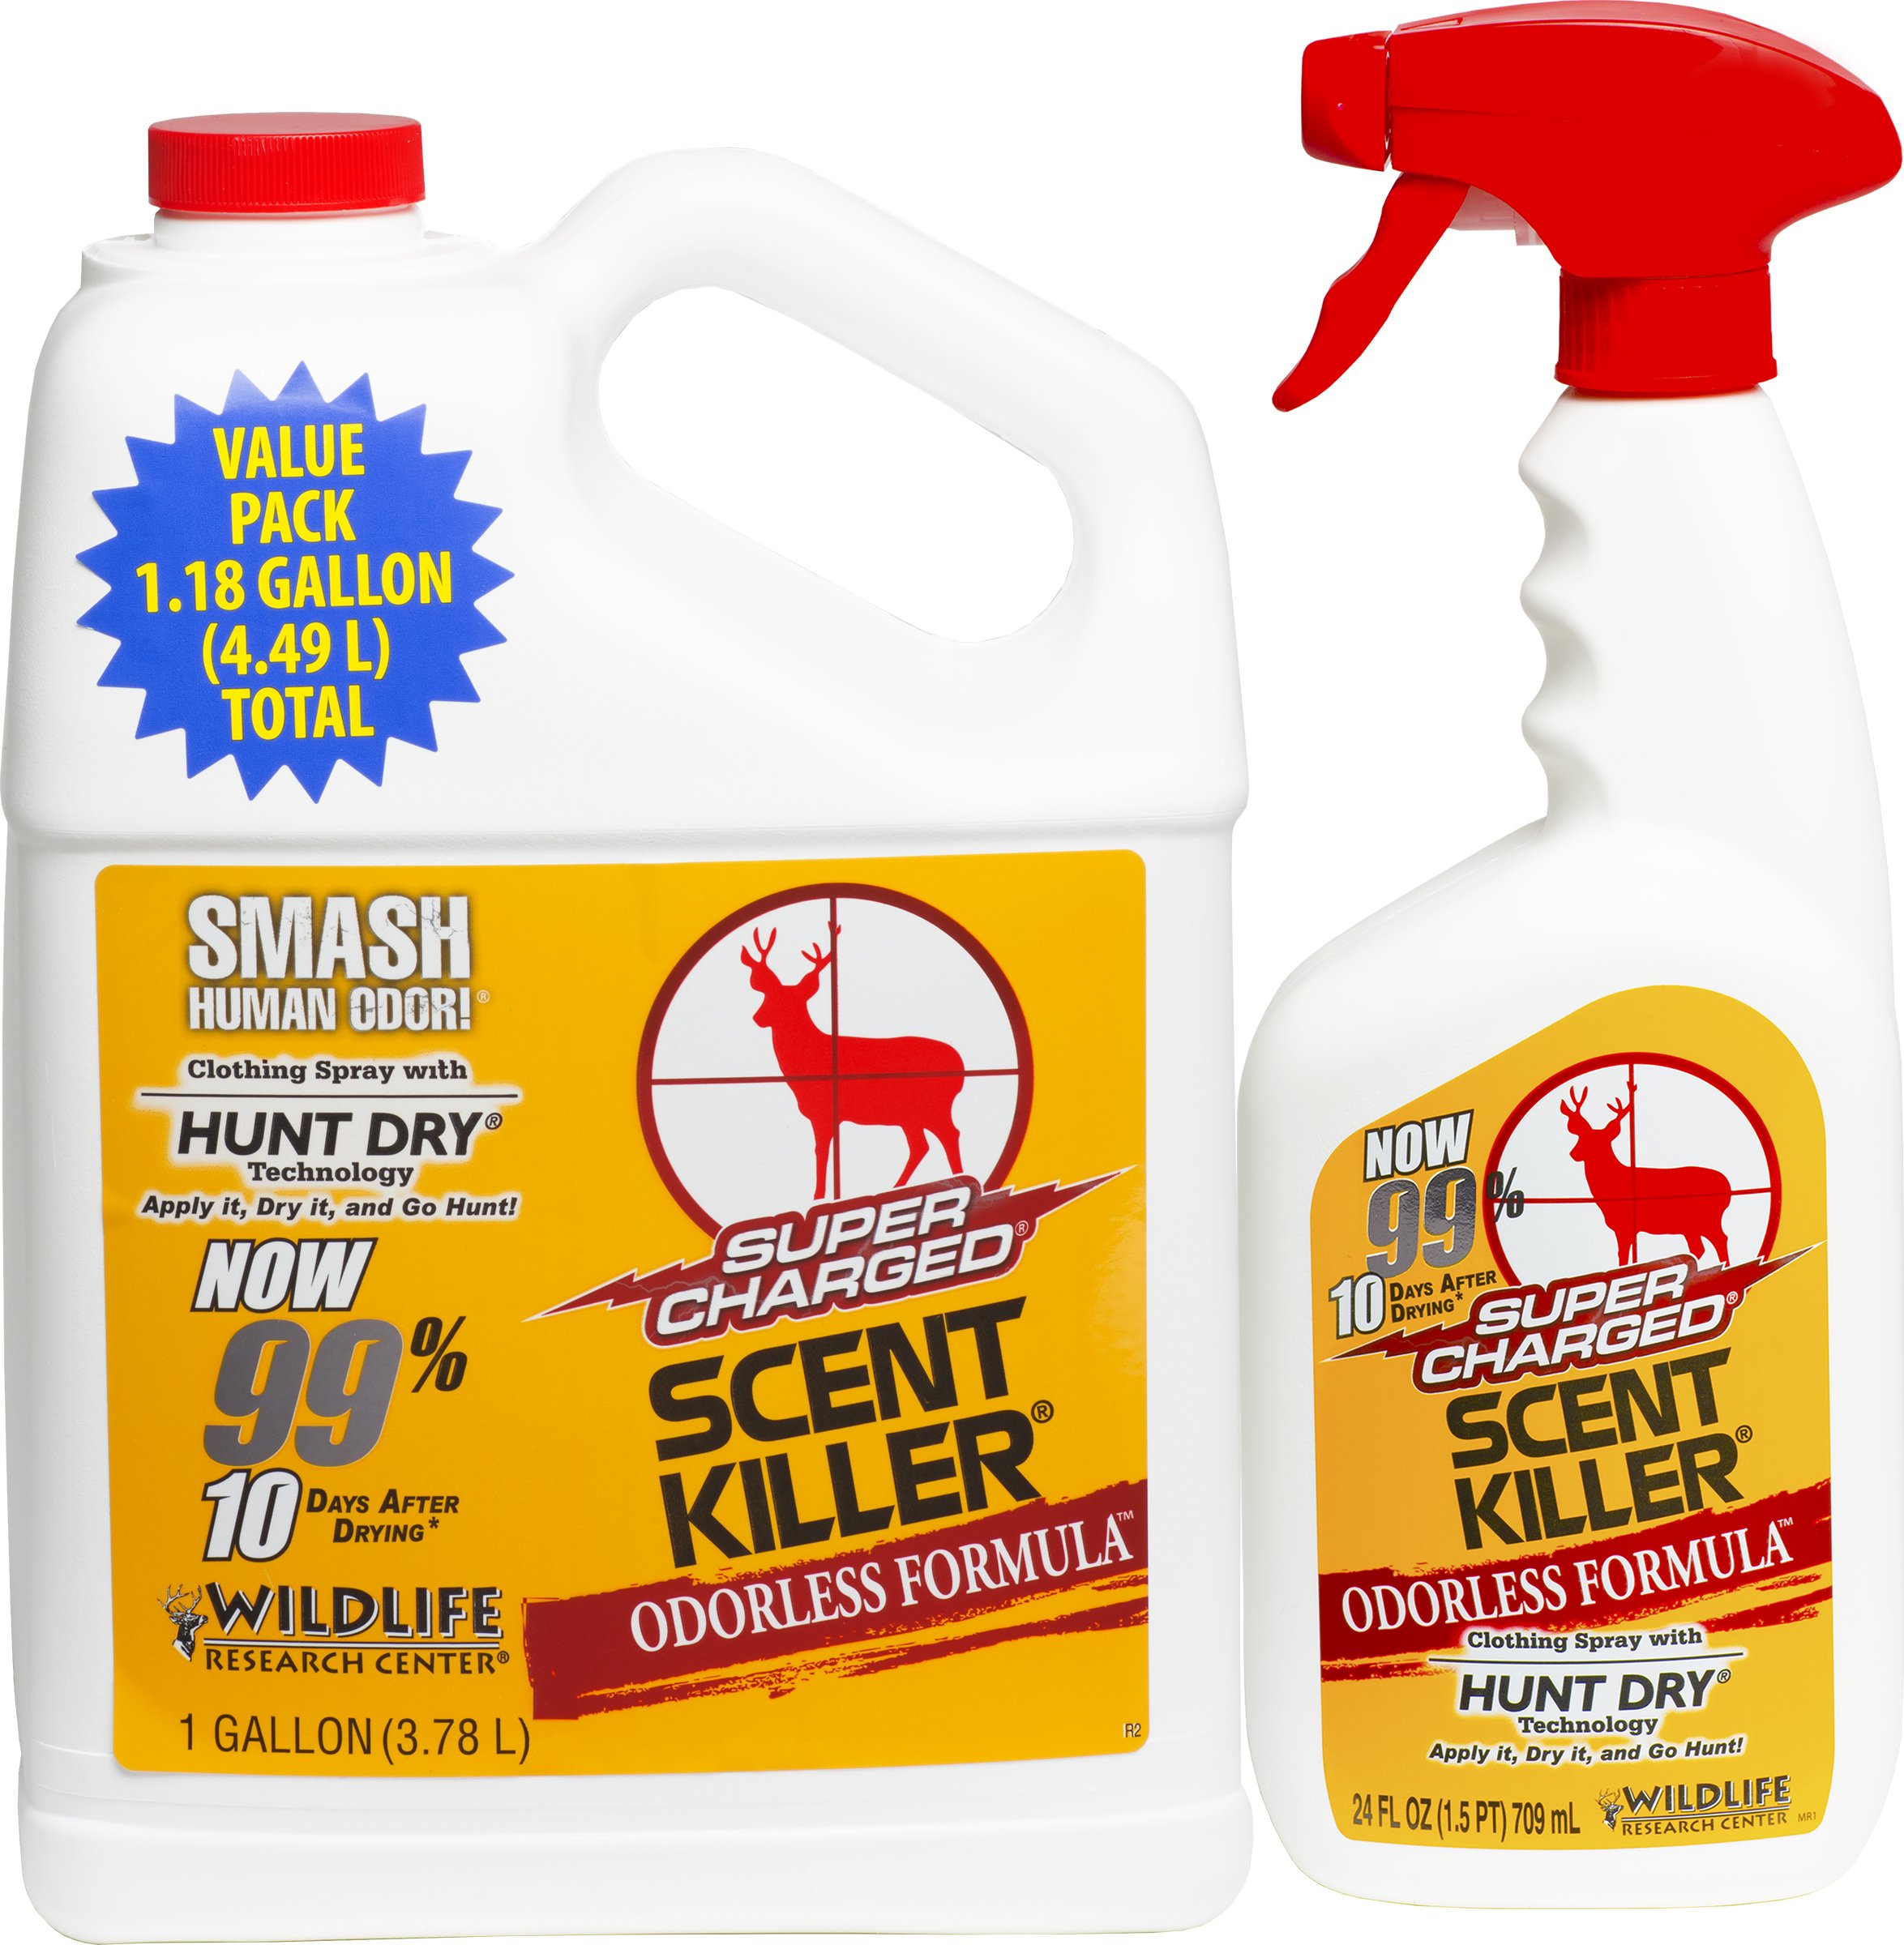 a combo of Scent Killer 559 Wildlife Research Supercharged spray